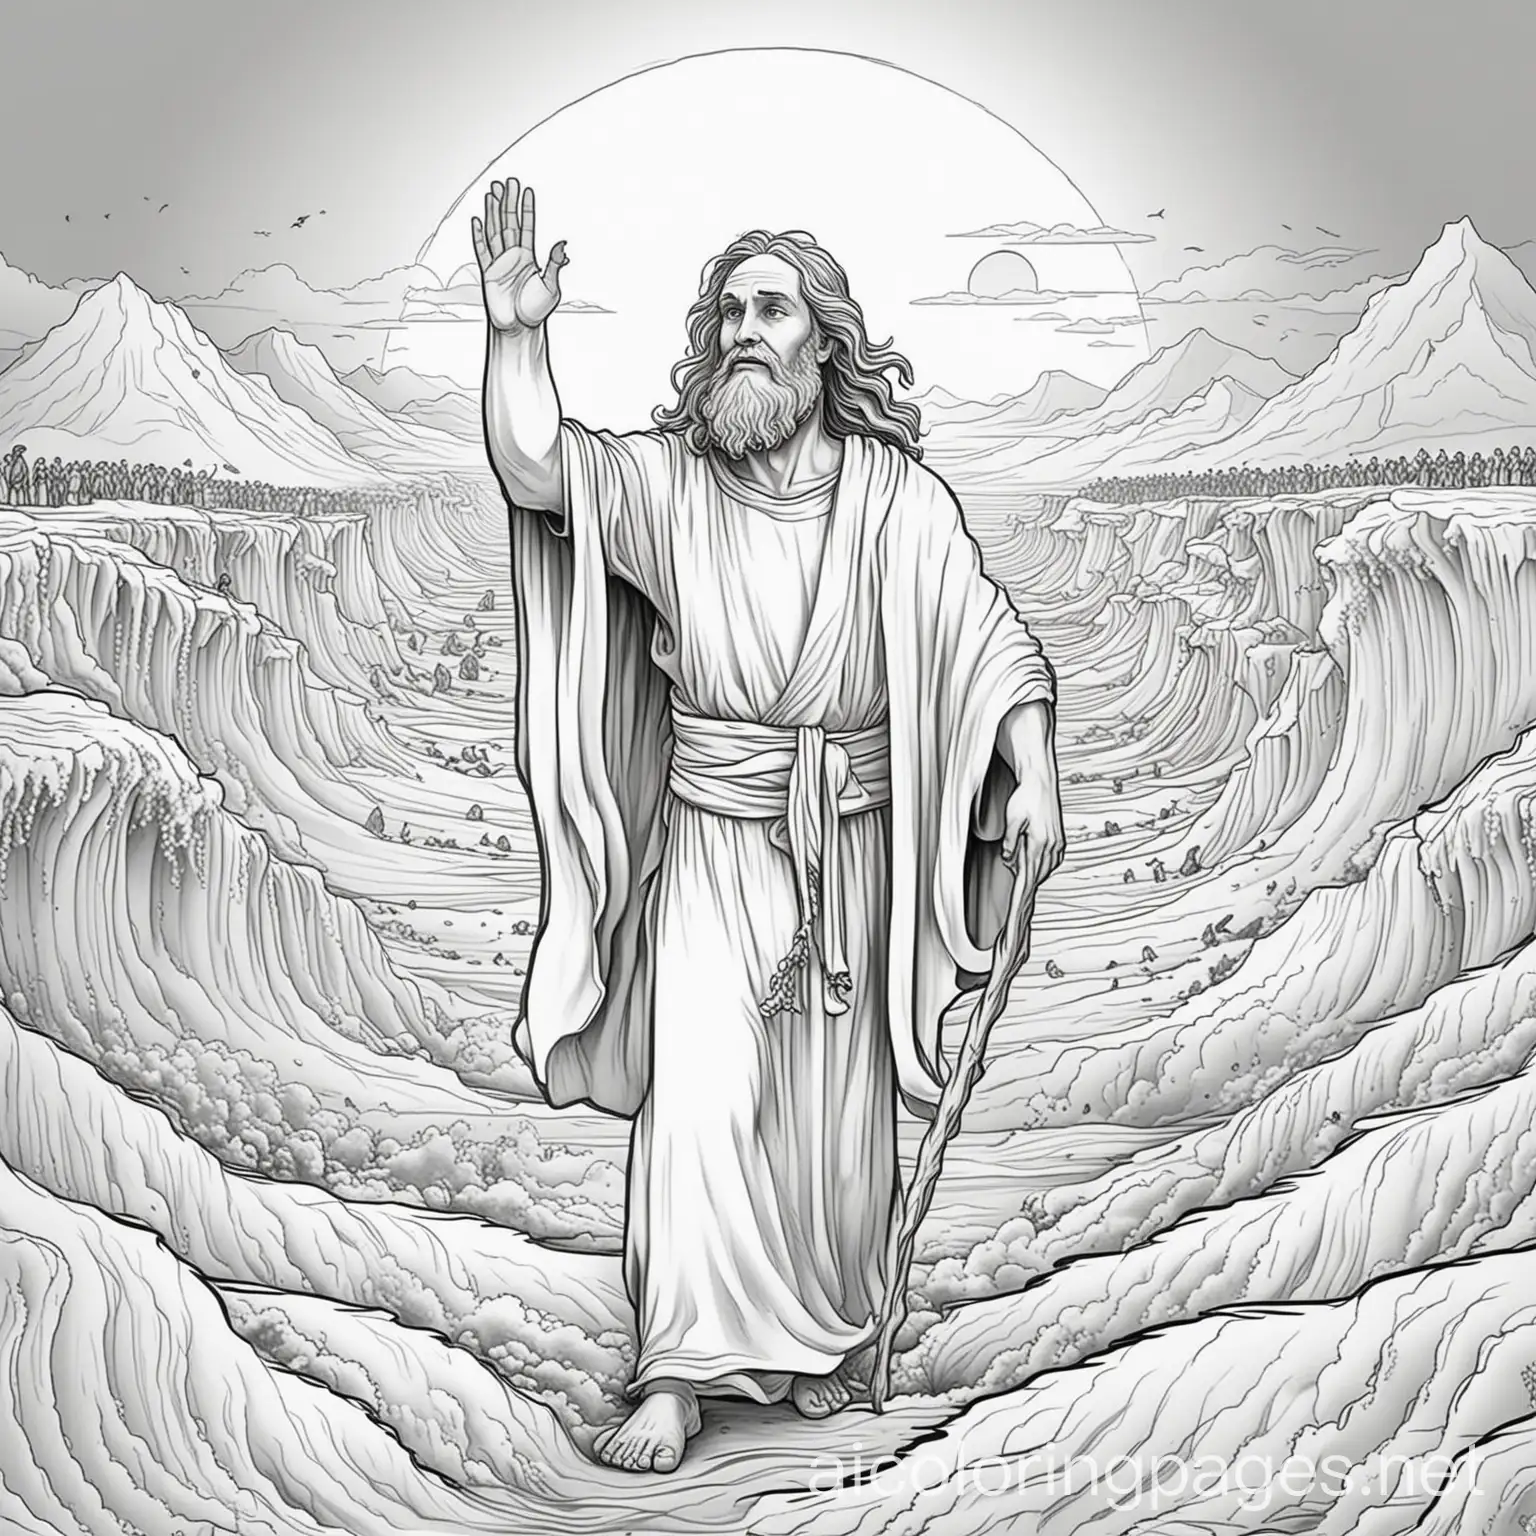 Moses parting the red sea, black and white, coloring page, Cartoon style for children, Coloring Page, black and white, line art, white background, Simplicity, Ample White Space. The background of the coloring page is plain white to make it easy for young children to color within the lines. The outlines of all the subjects are easy to distinguish, making it simple for kids to color without too much difficulty